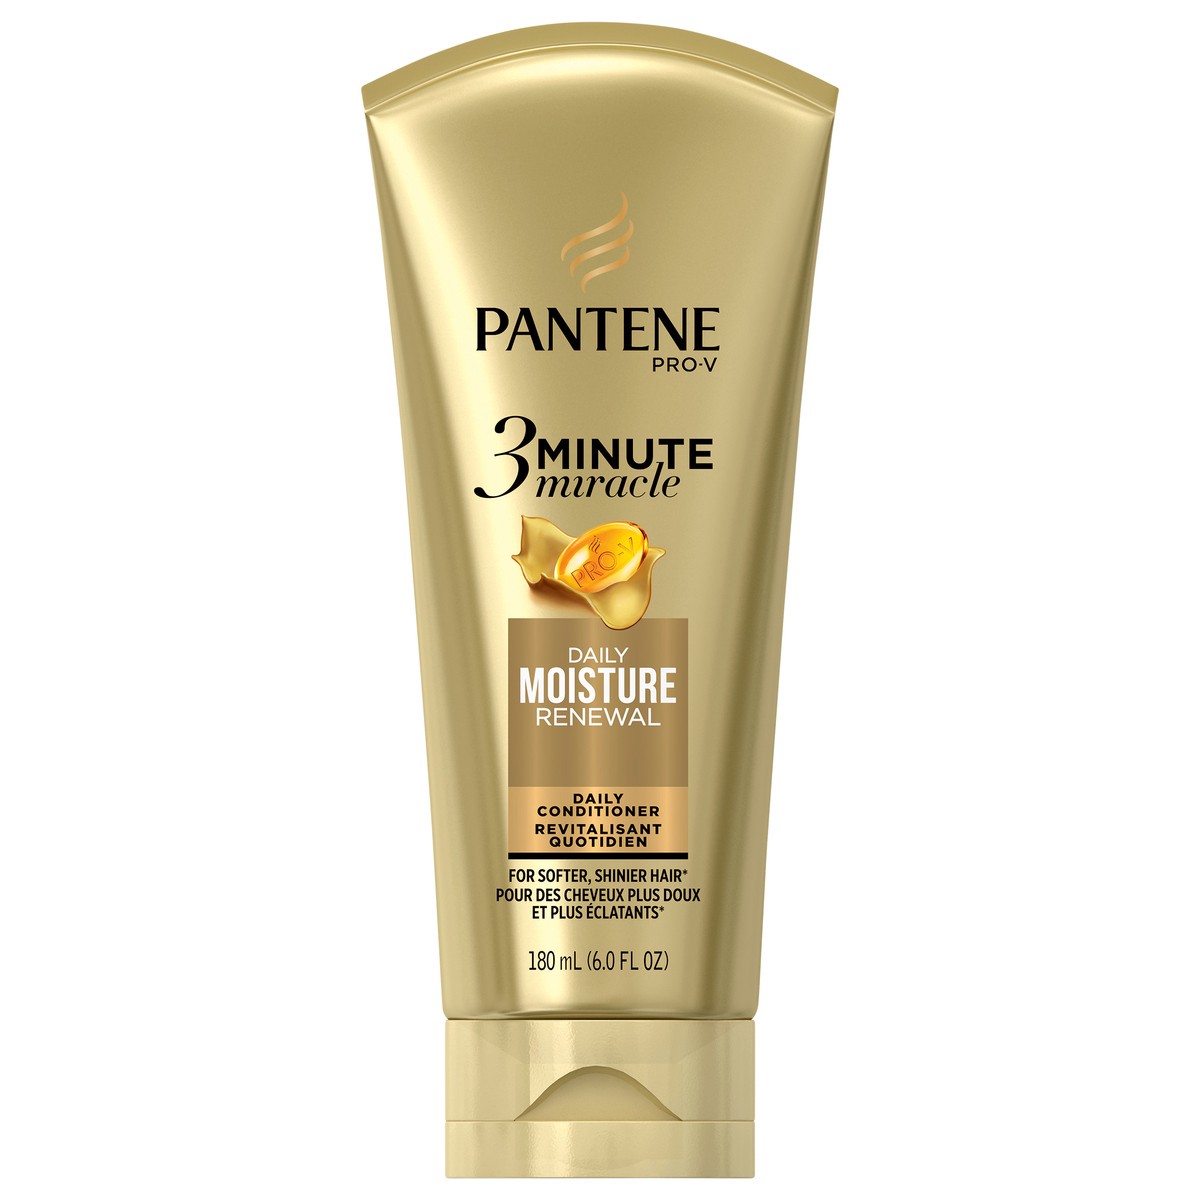 slide 1 of 3, Pantene Daily Moisture Renewal 3 Minute Miracle Daily Conditioner, 6.0 fl oz, 6 fl oz